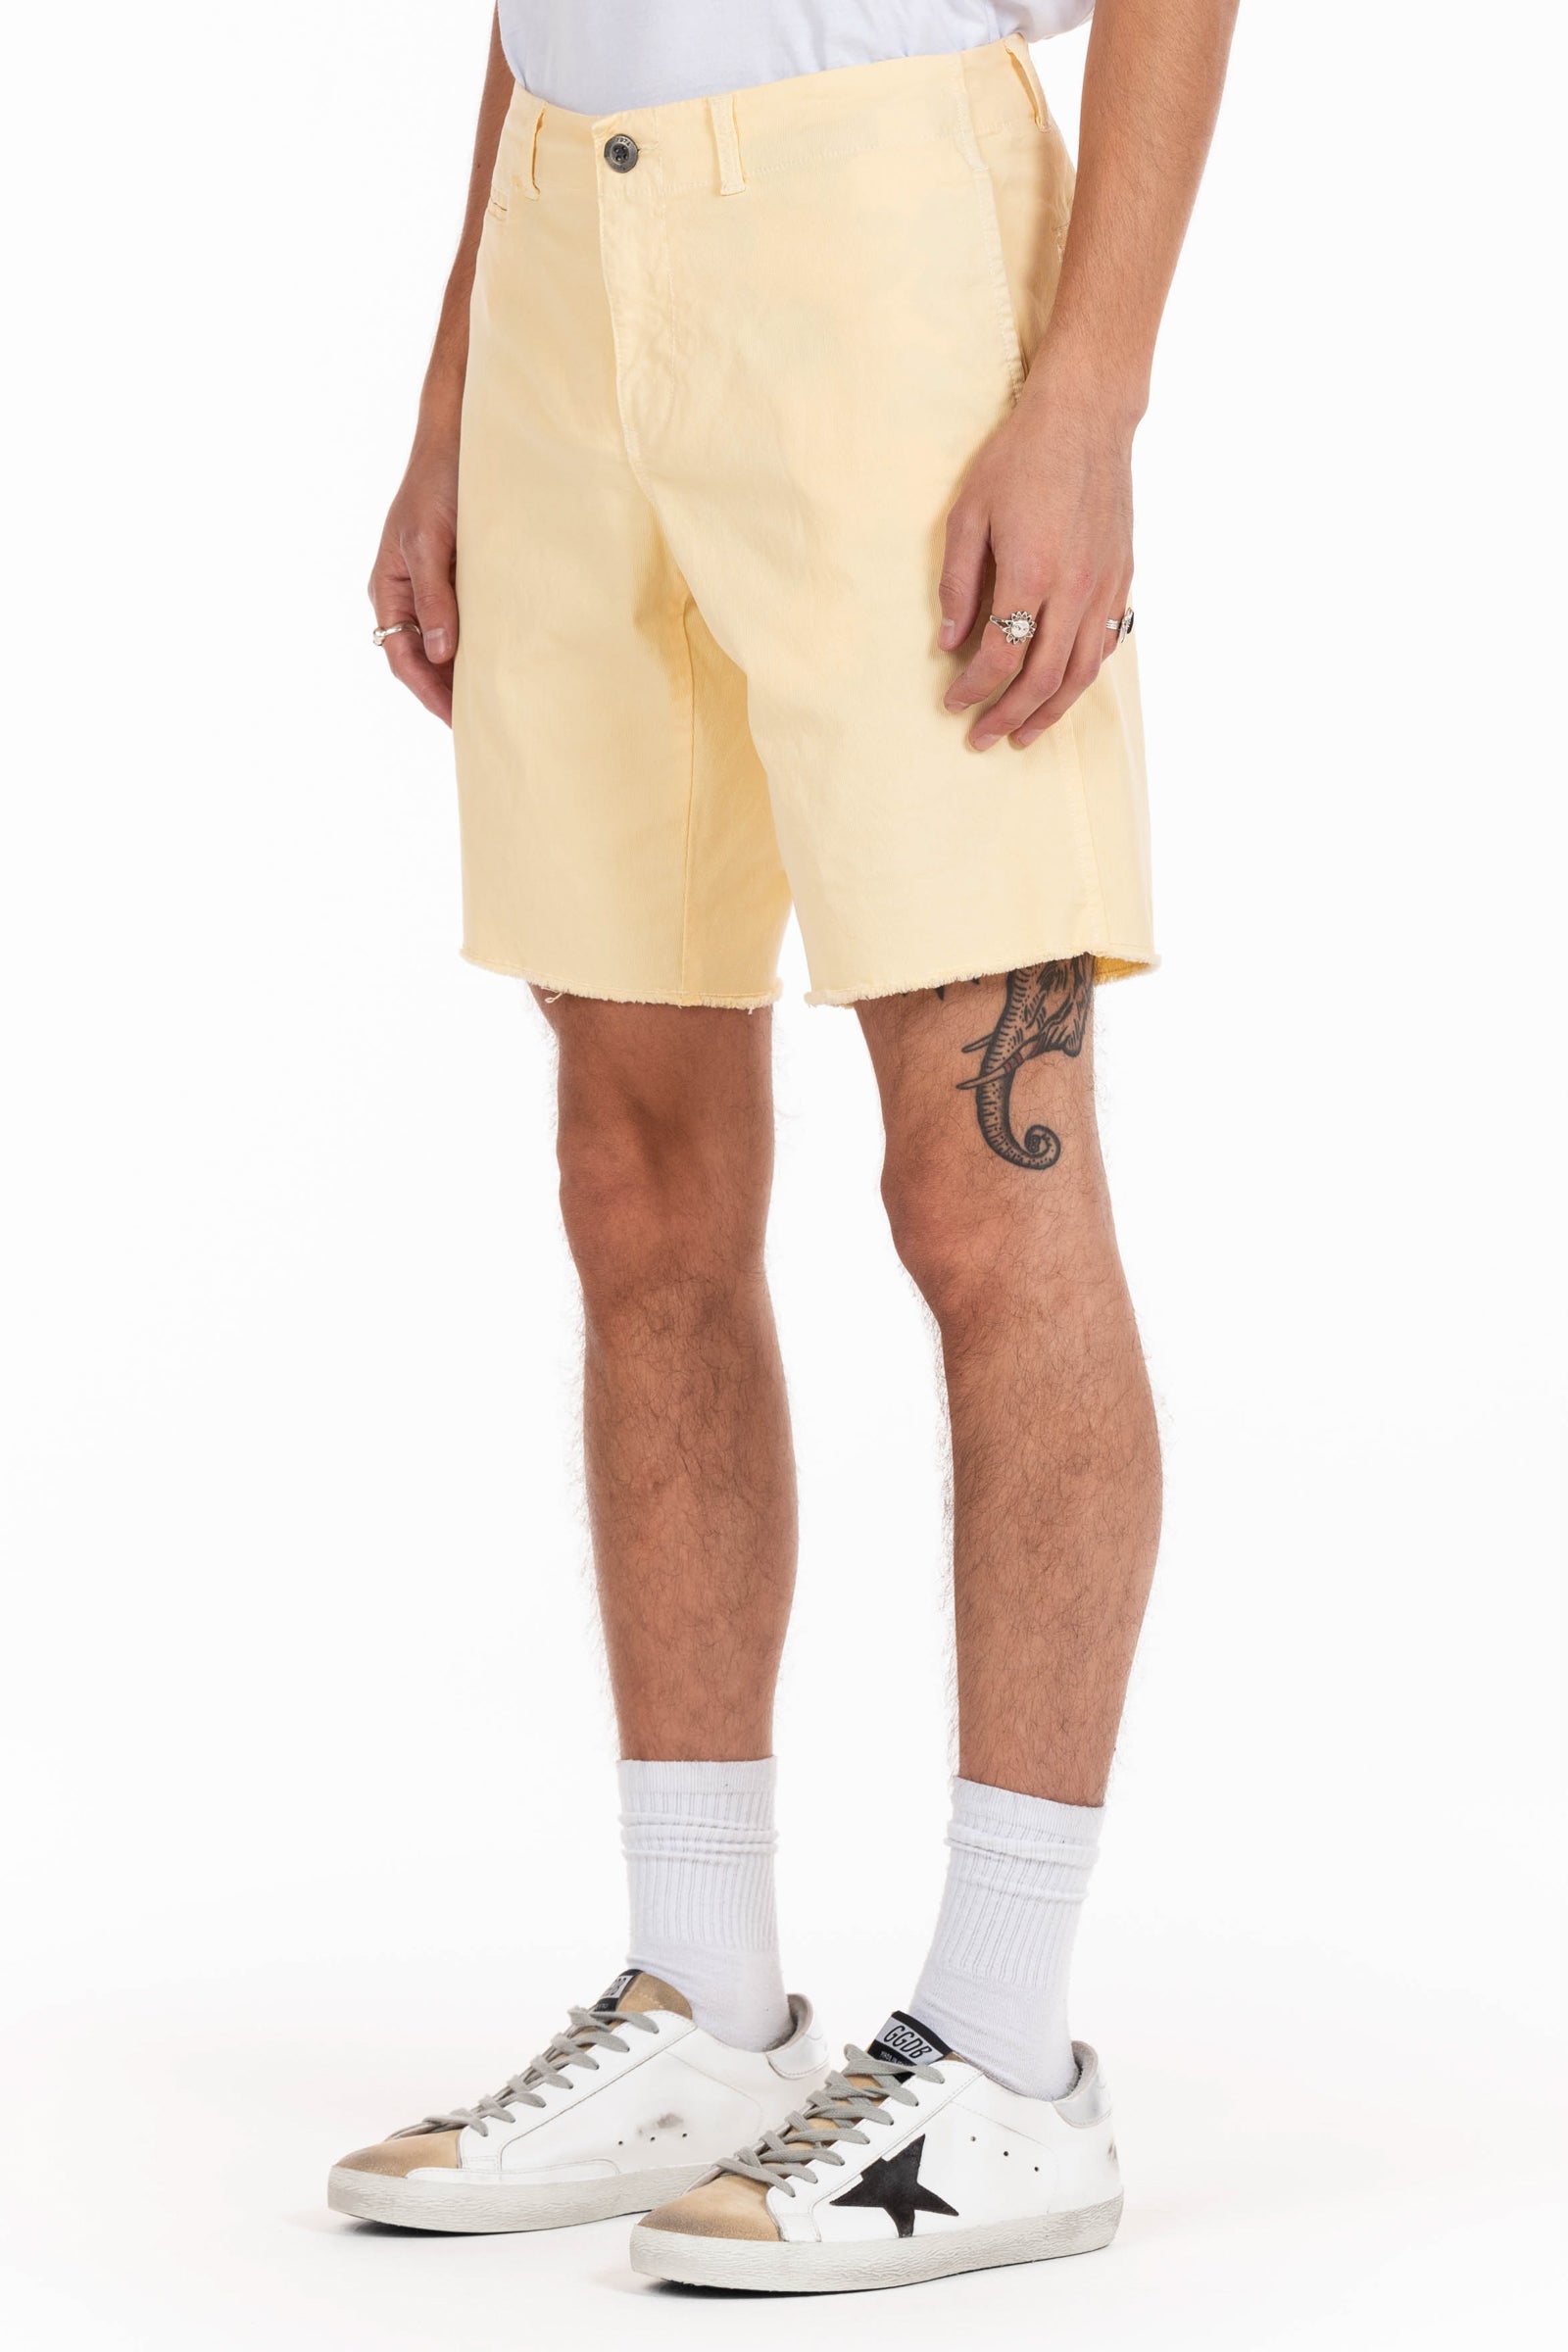 Original Paperbacks Rockland Chino Short in Custard on Model Cropped Side View